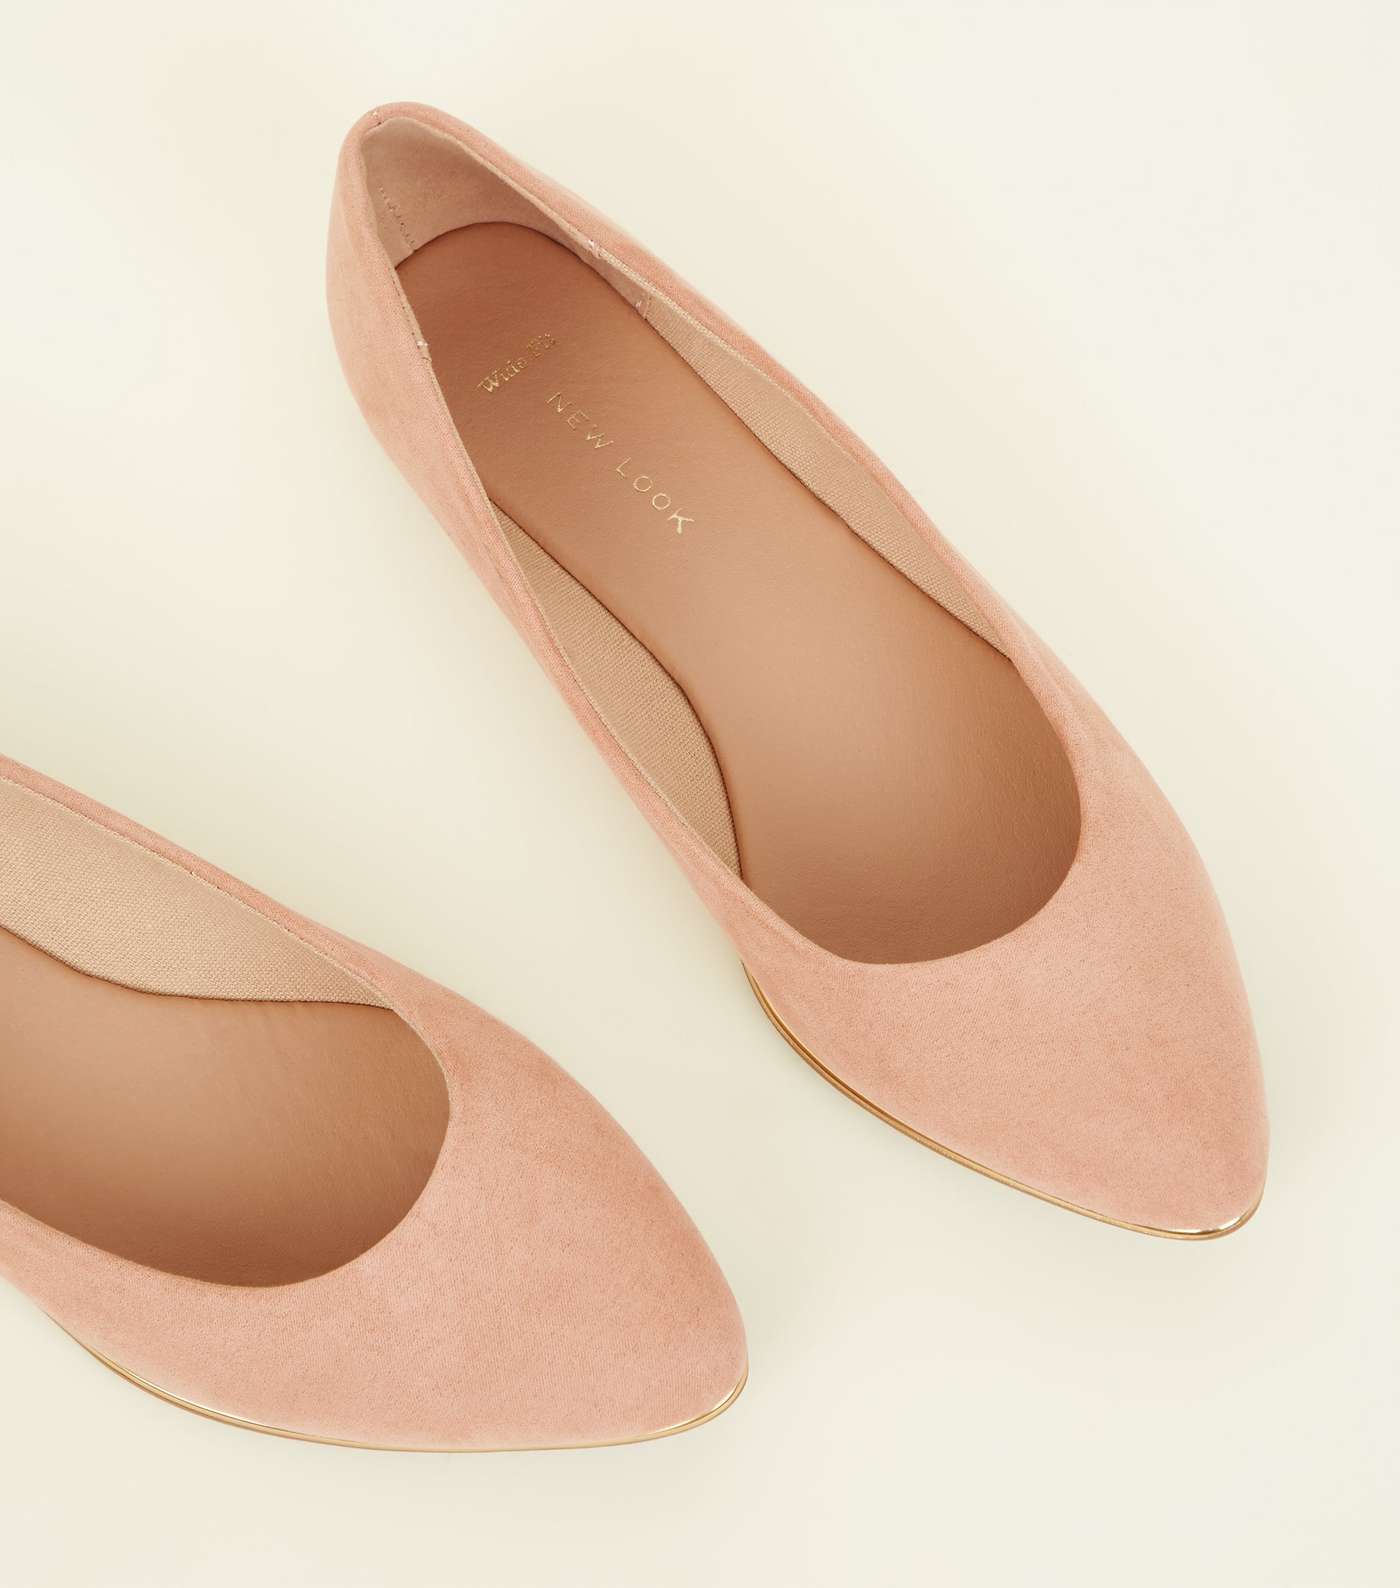 Wide Fit Nude Suedette Piped Edge Ballet Pumps Image 4